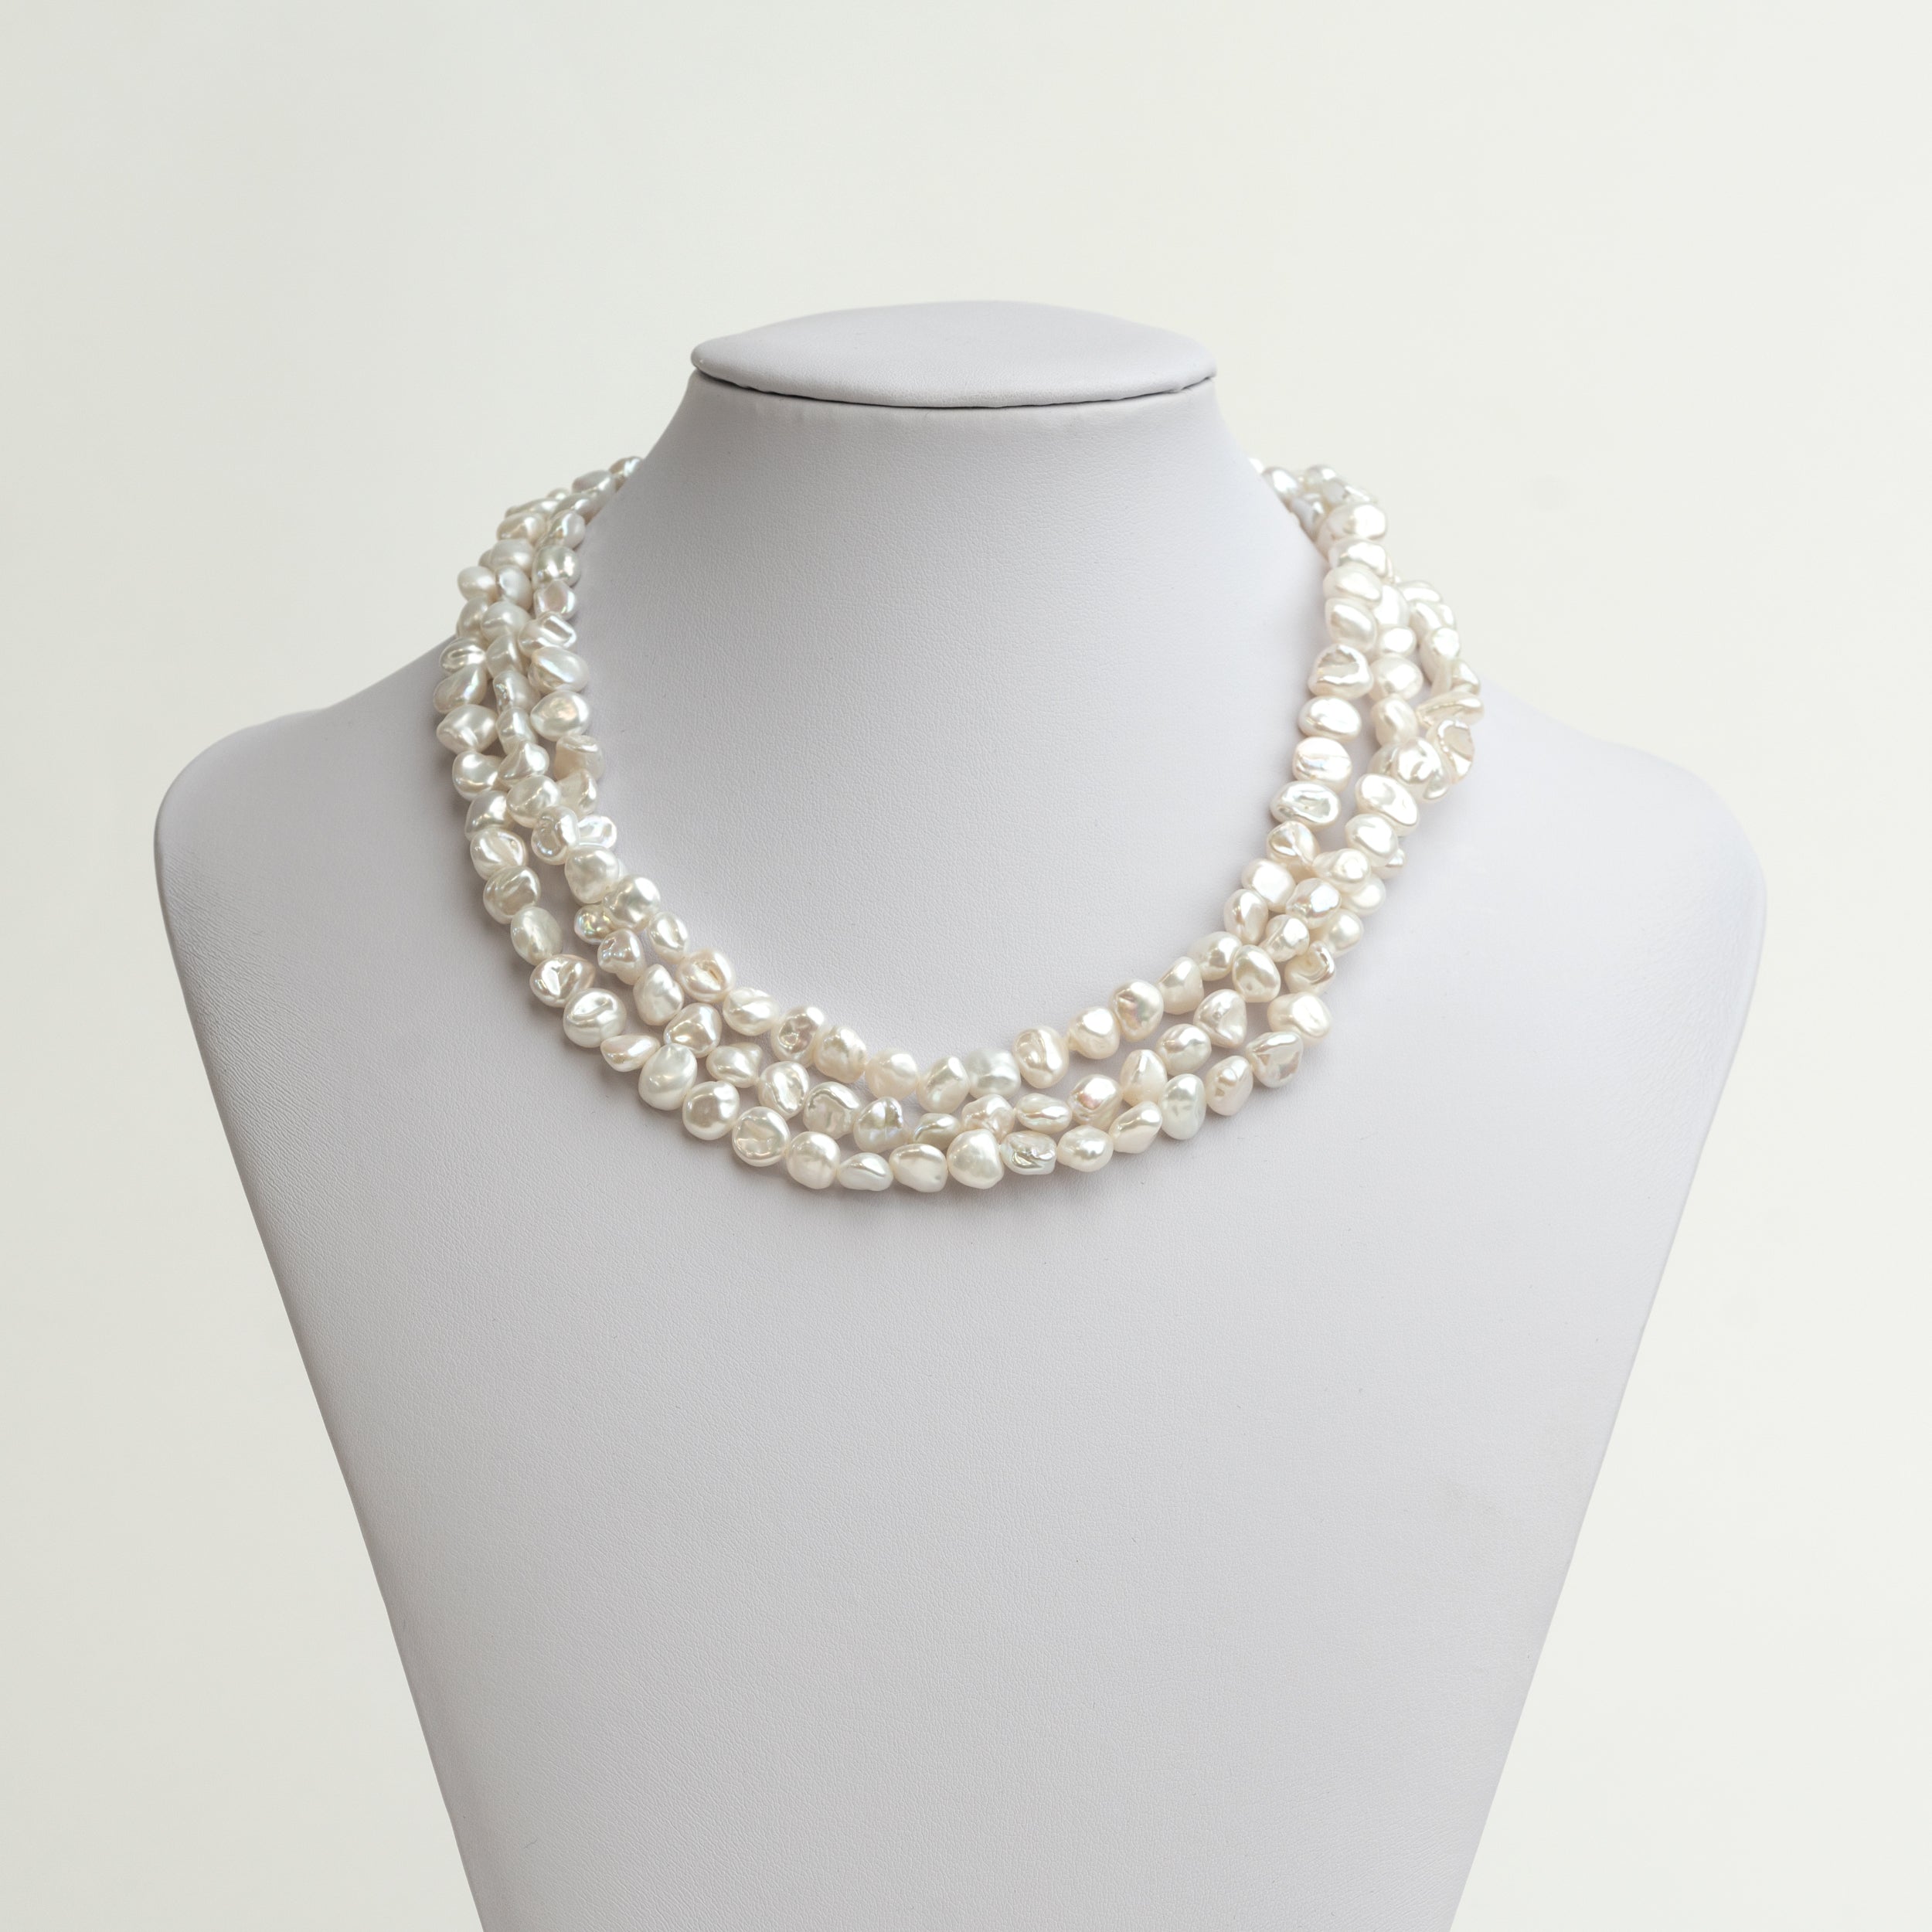 7-9mm Keshi Baroque Freshwater Cultured Pearl Necklace, 120cm long